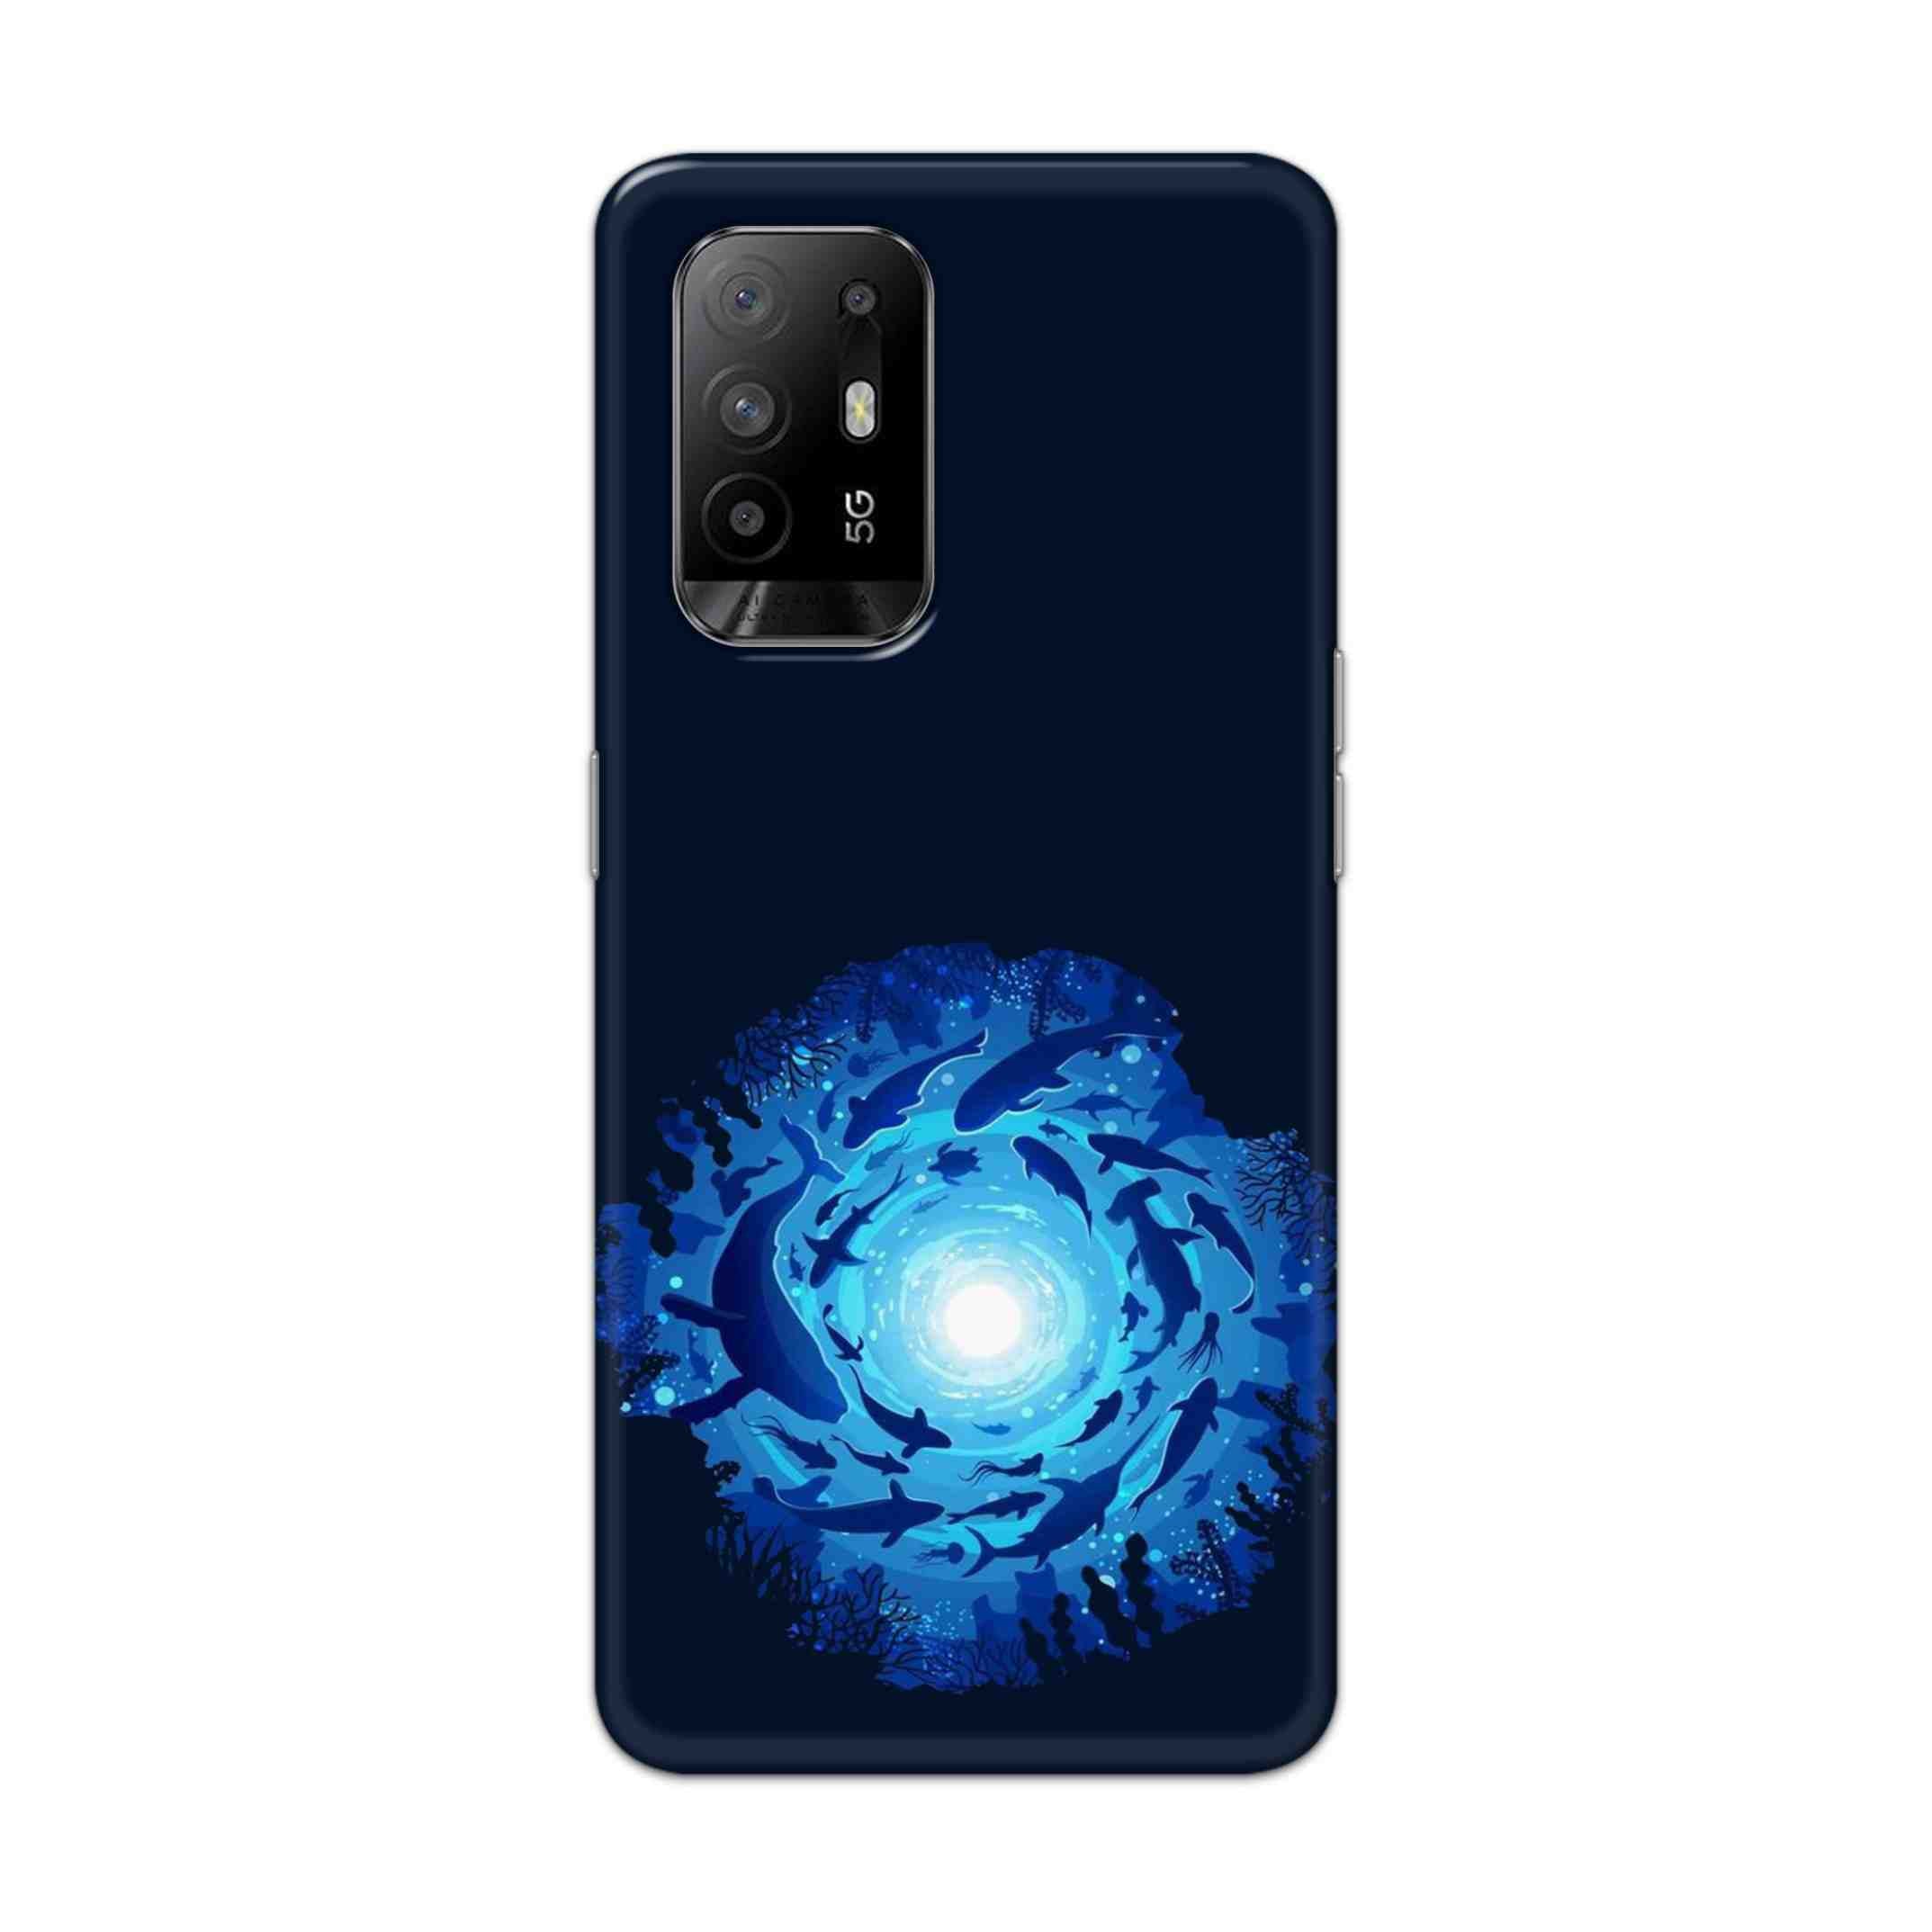 Buy Blue Whale Hard Back Mobile Phone Case Cover For Oppo F19 Pro Plus Online